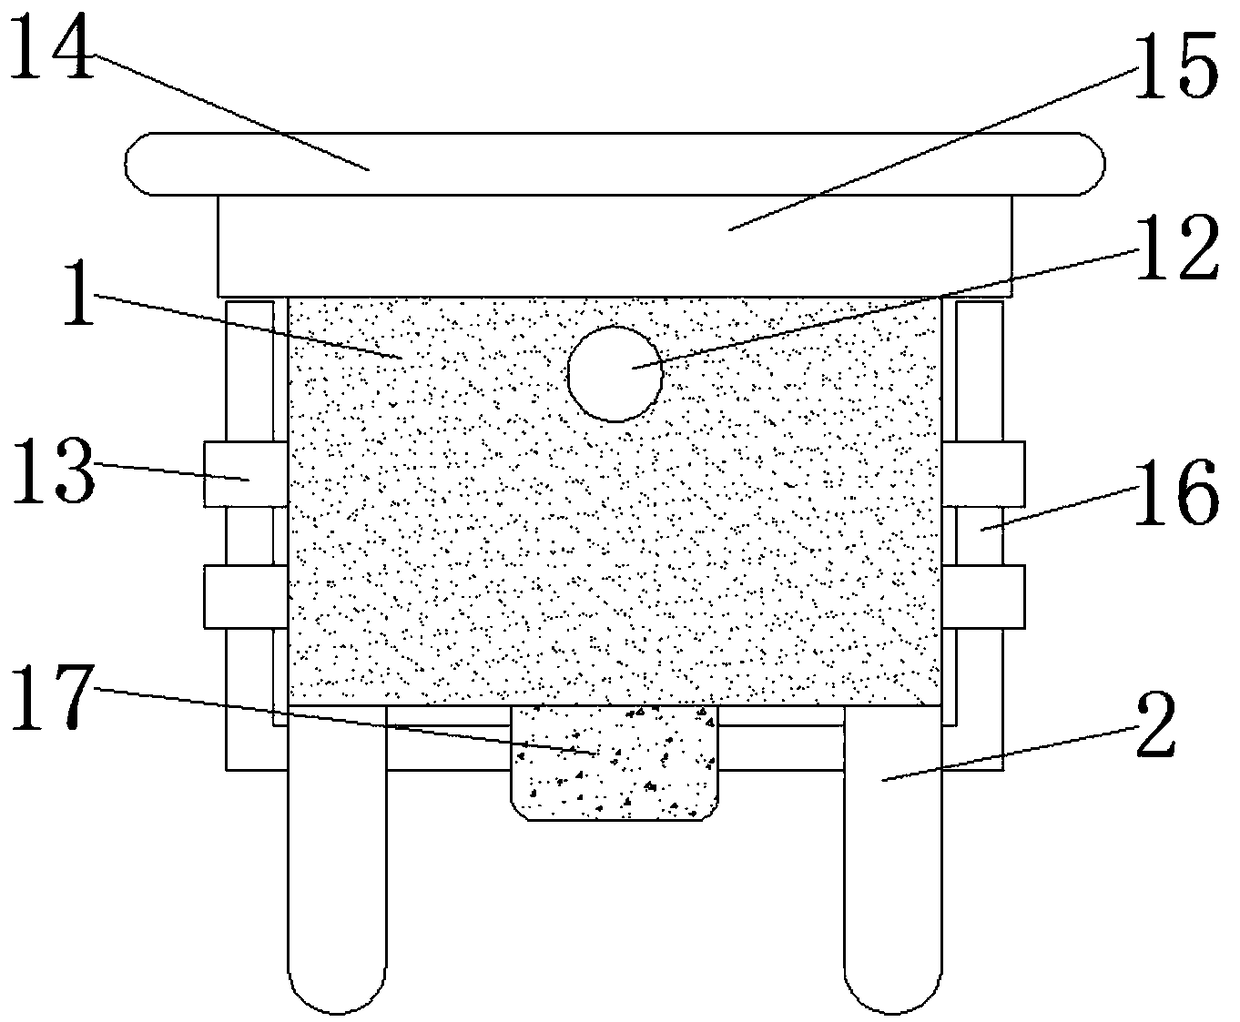 Device for automatically spraying waterproof coating